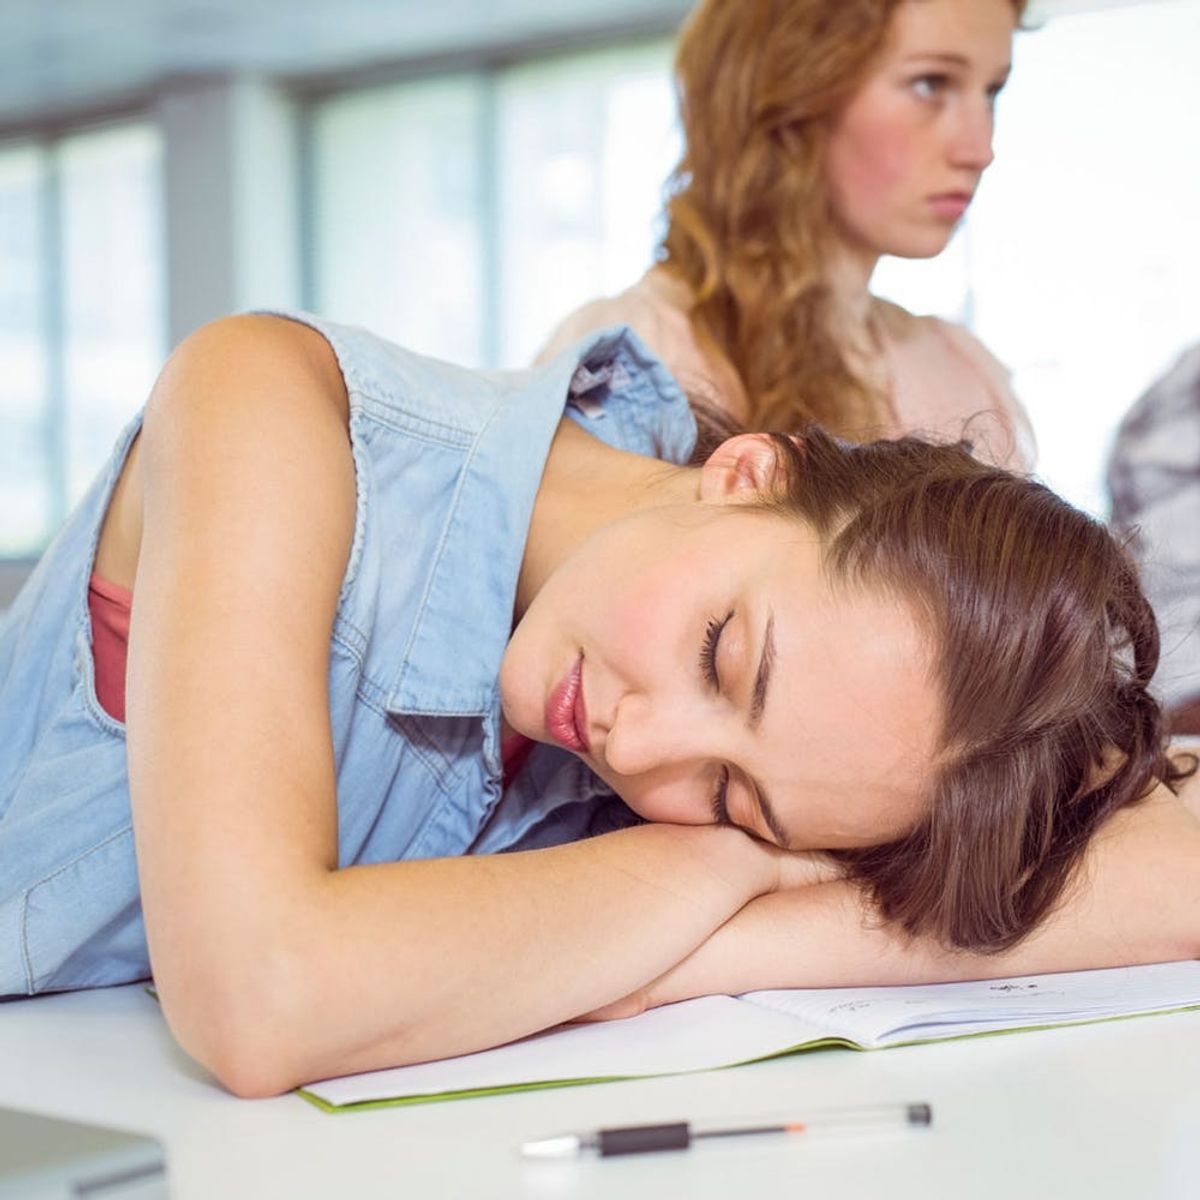 A Genius Hack for Getting Away With a “Nap” at Work